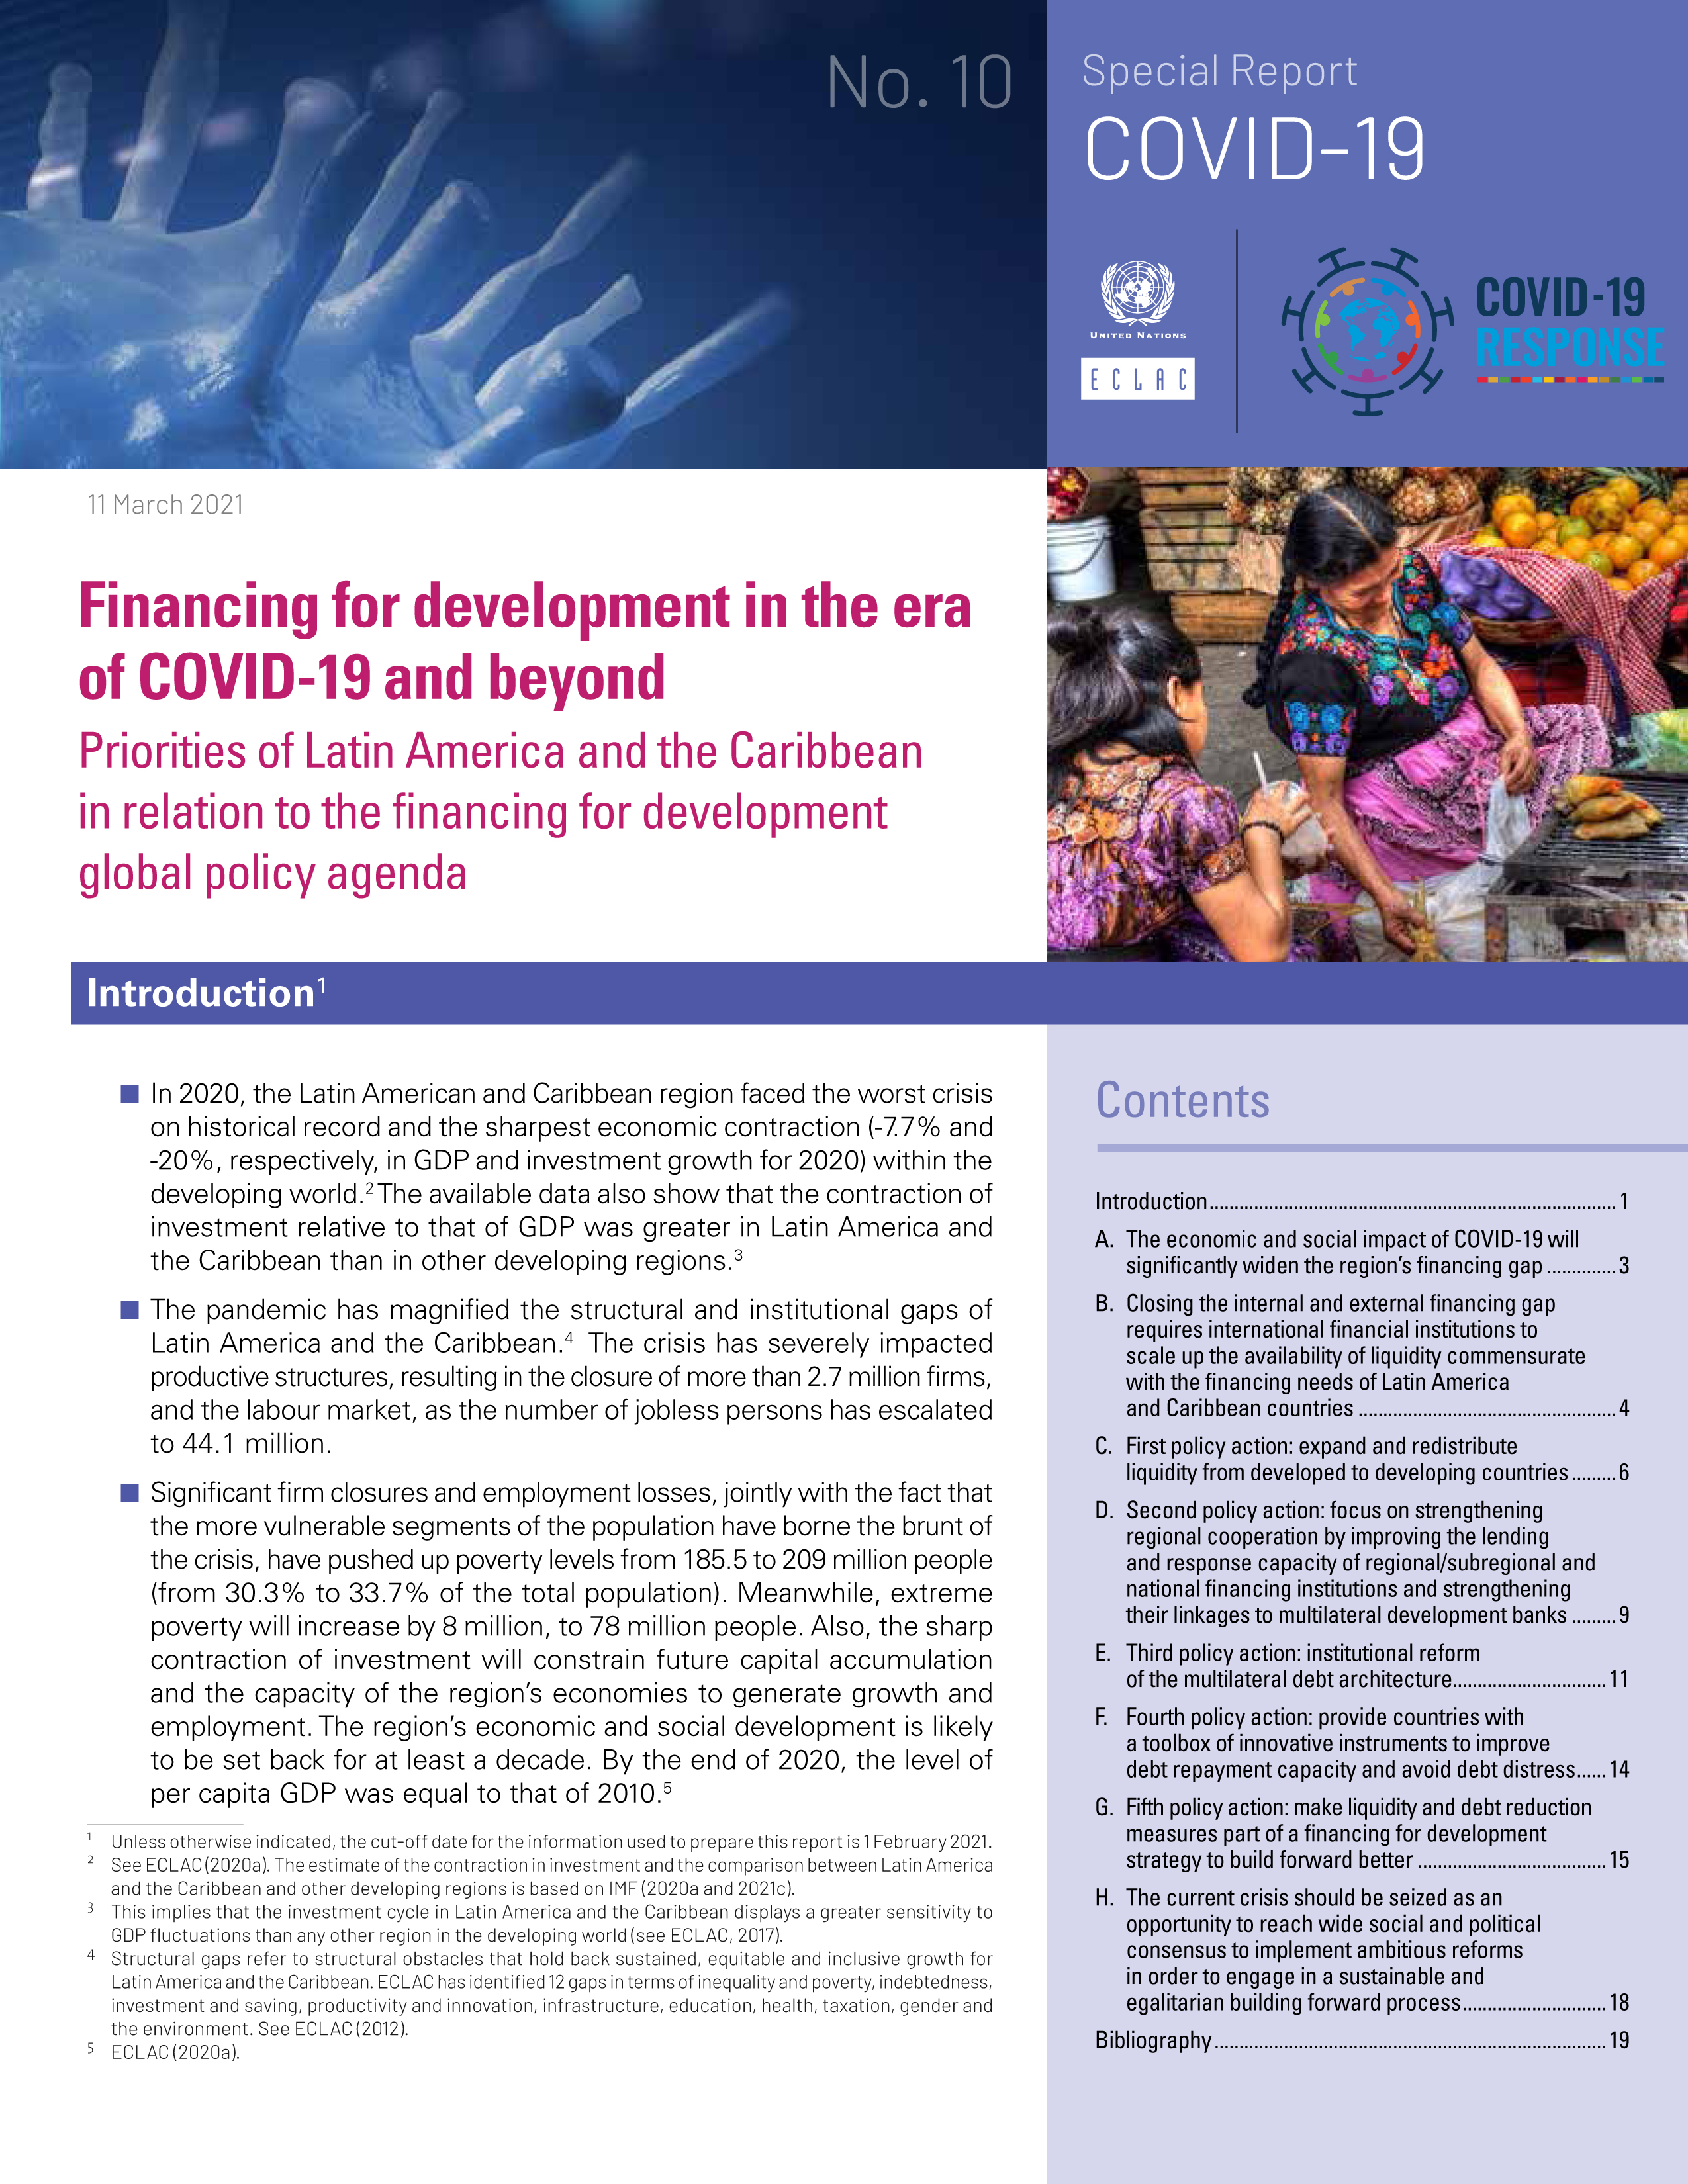 image of Financing for Development in the Era of COVID-19 and Beyond